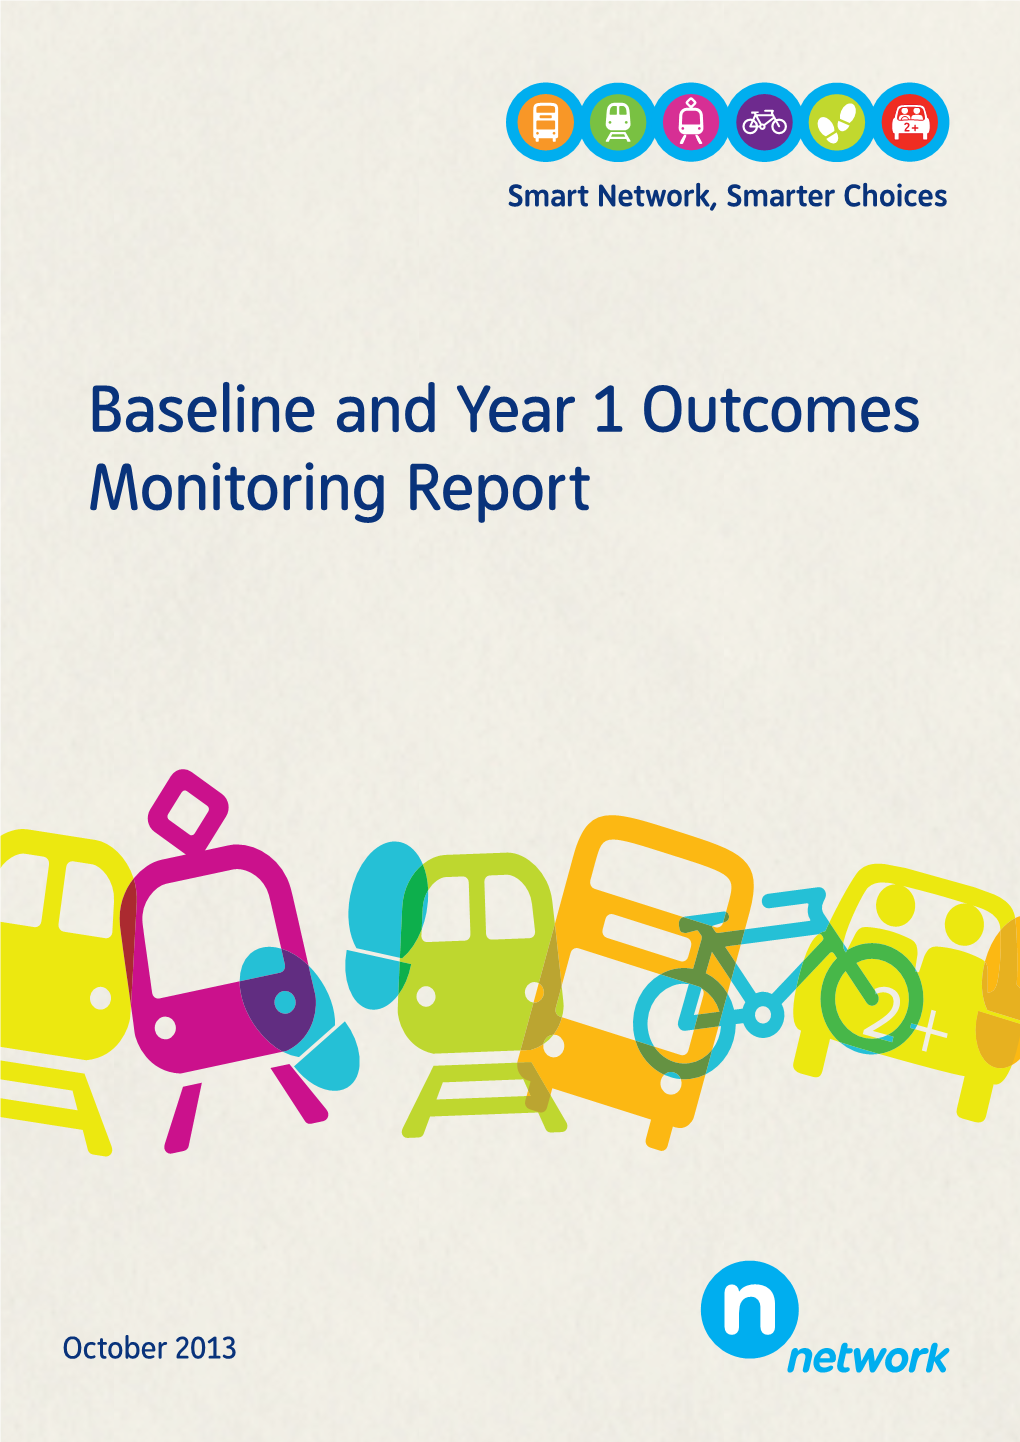 Baseline and Year 1 Outcomes Monitoring Report